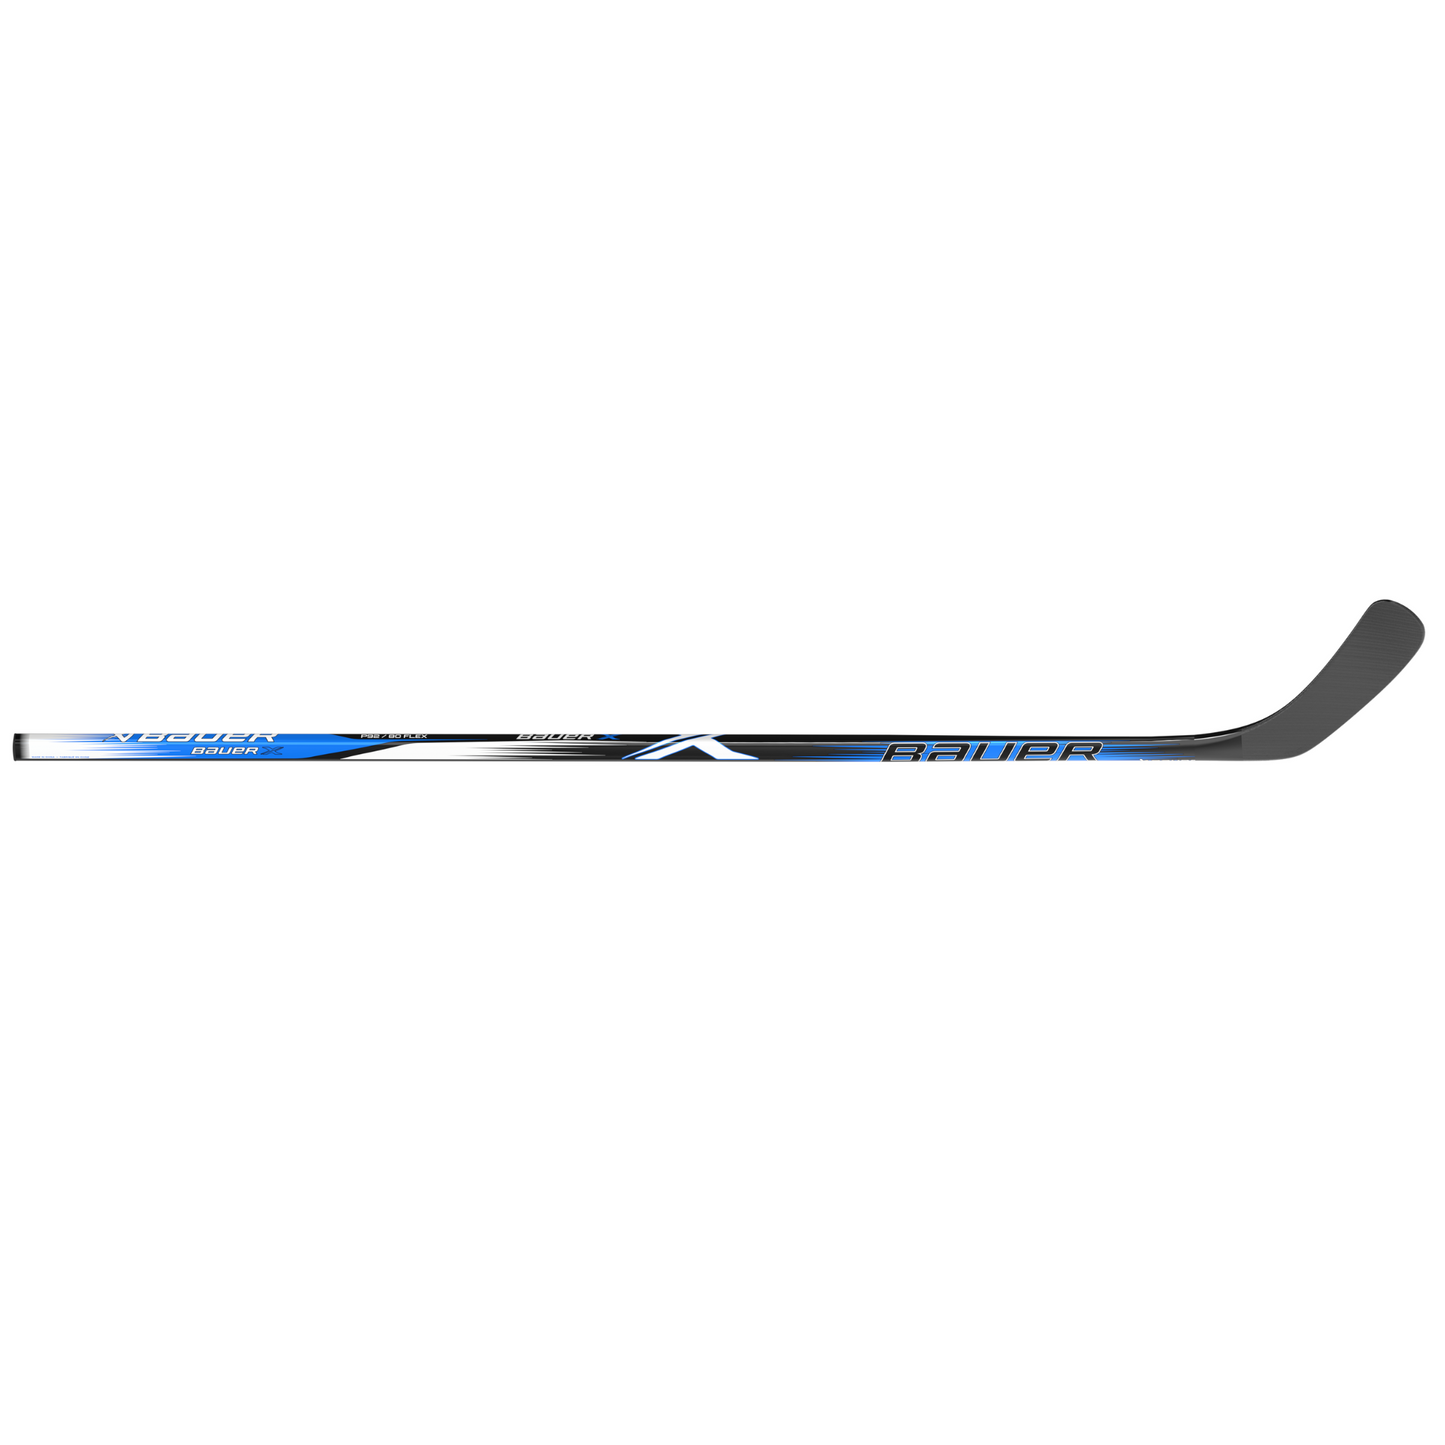 A photo of the Bauer X Series Intermediate Hockey Stick in colour black and blue, side view.